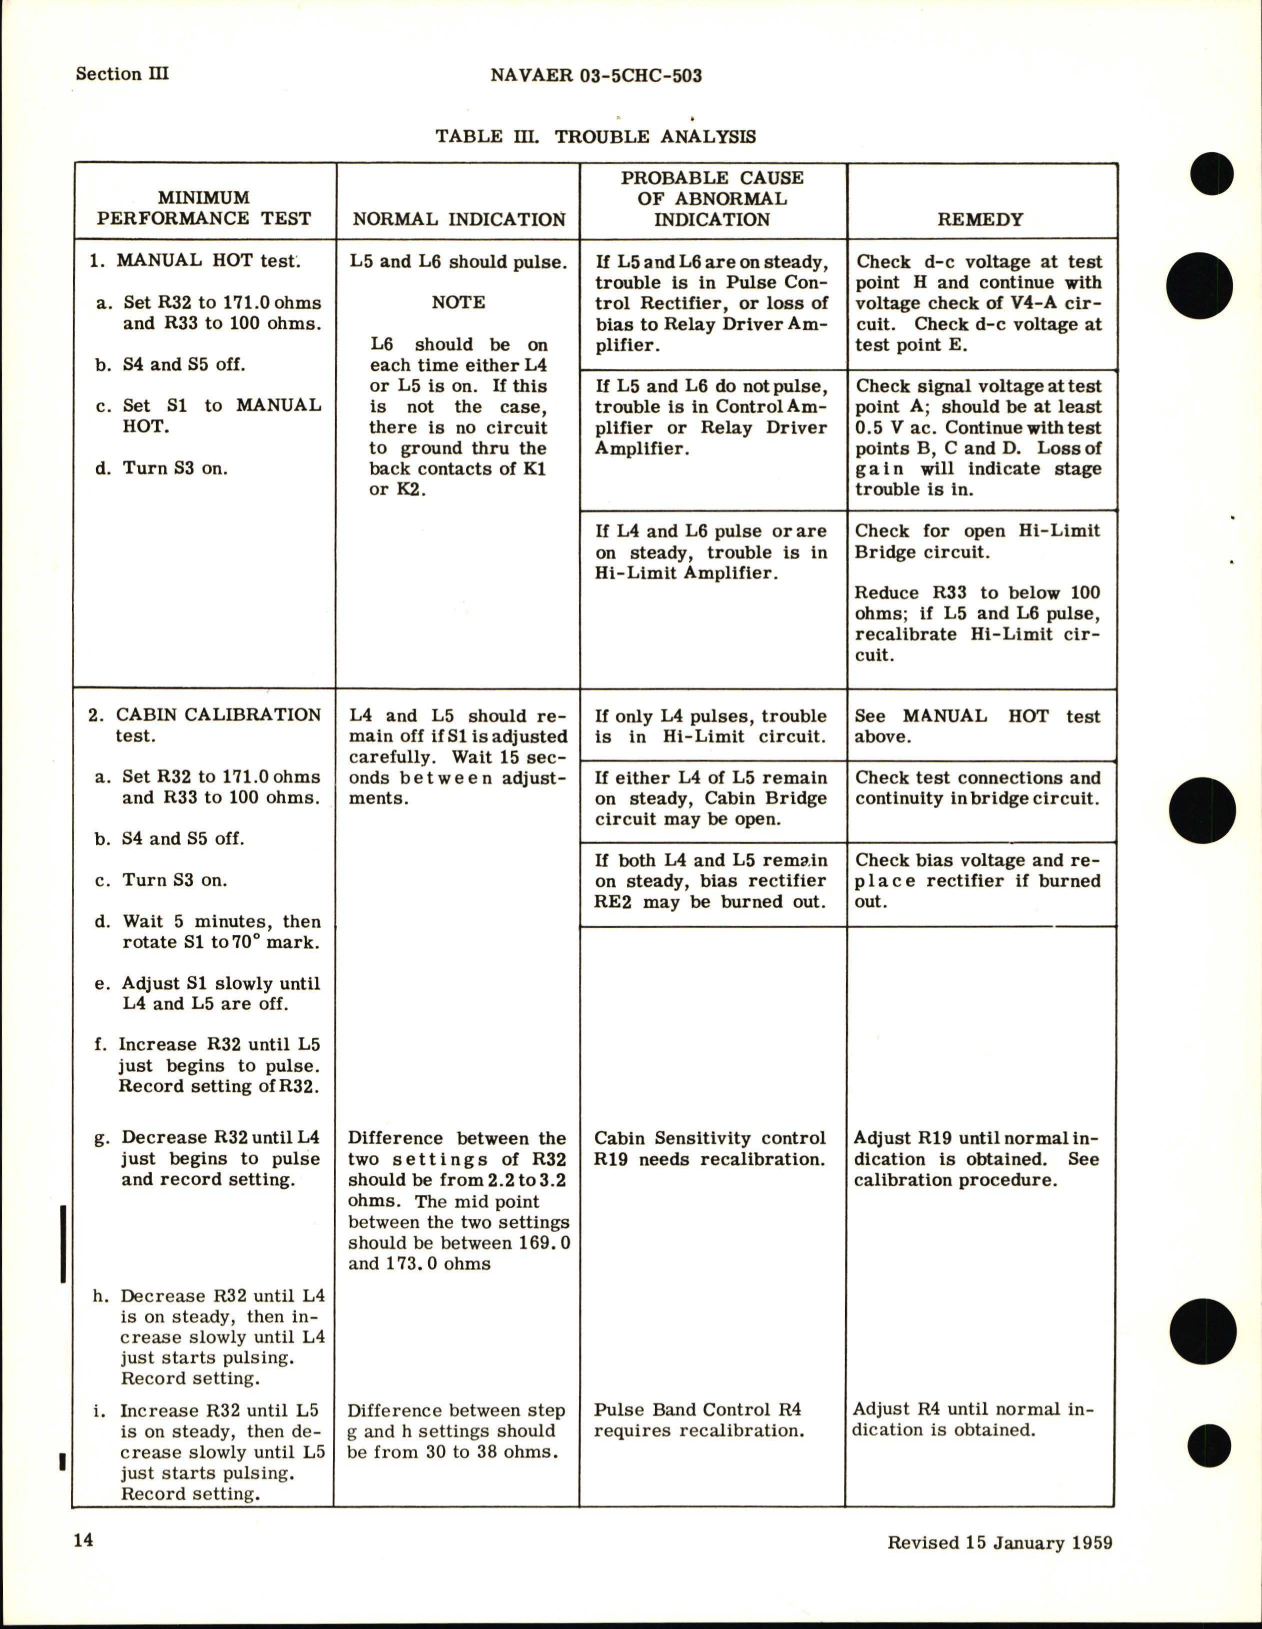 Sample page 8 from AirCorps Library document: Overhaul Instructions for Electronic Control Box - CYLZ 4807-1 and CYLZ 4807-2